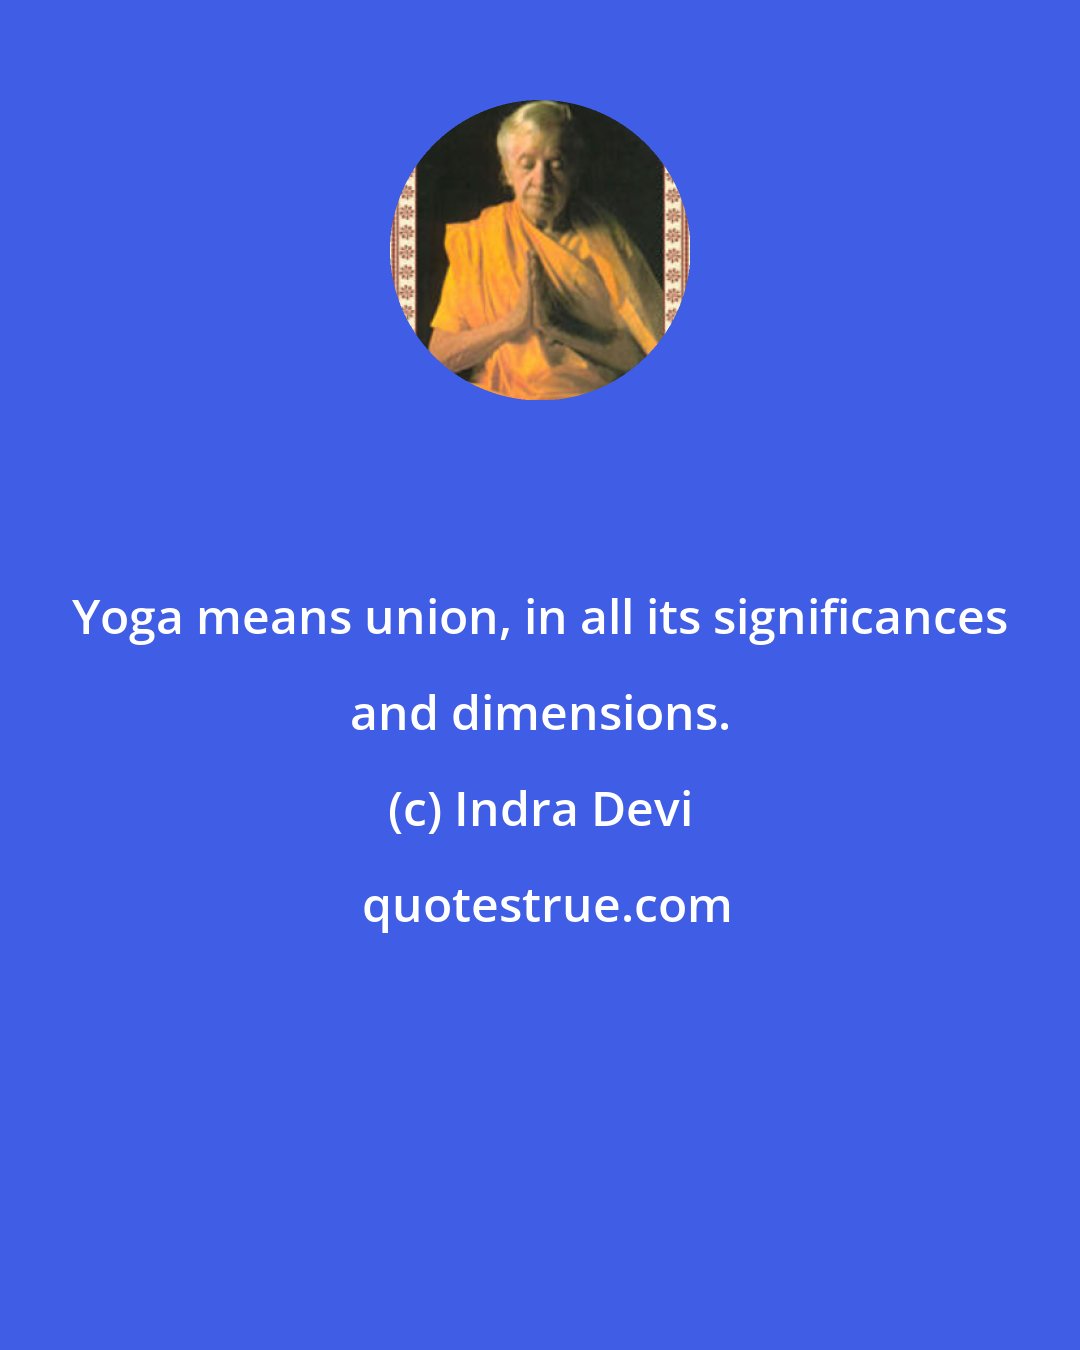 Indra Devi: Yoga means union, in all its significances and dimensions.